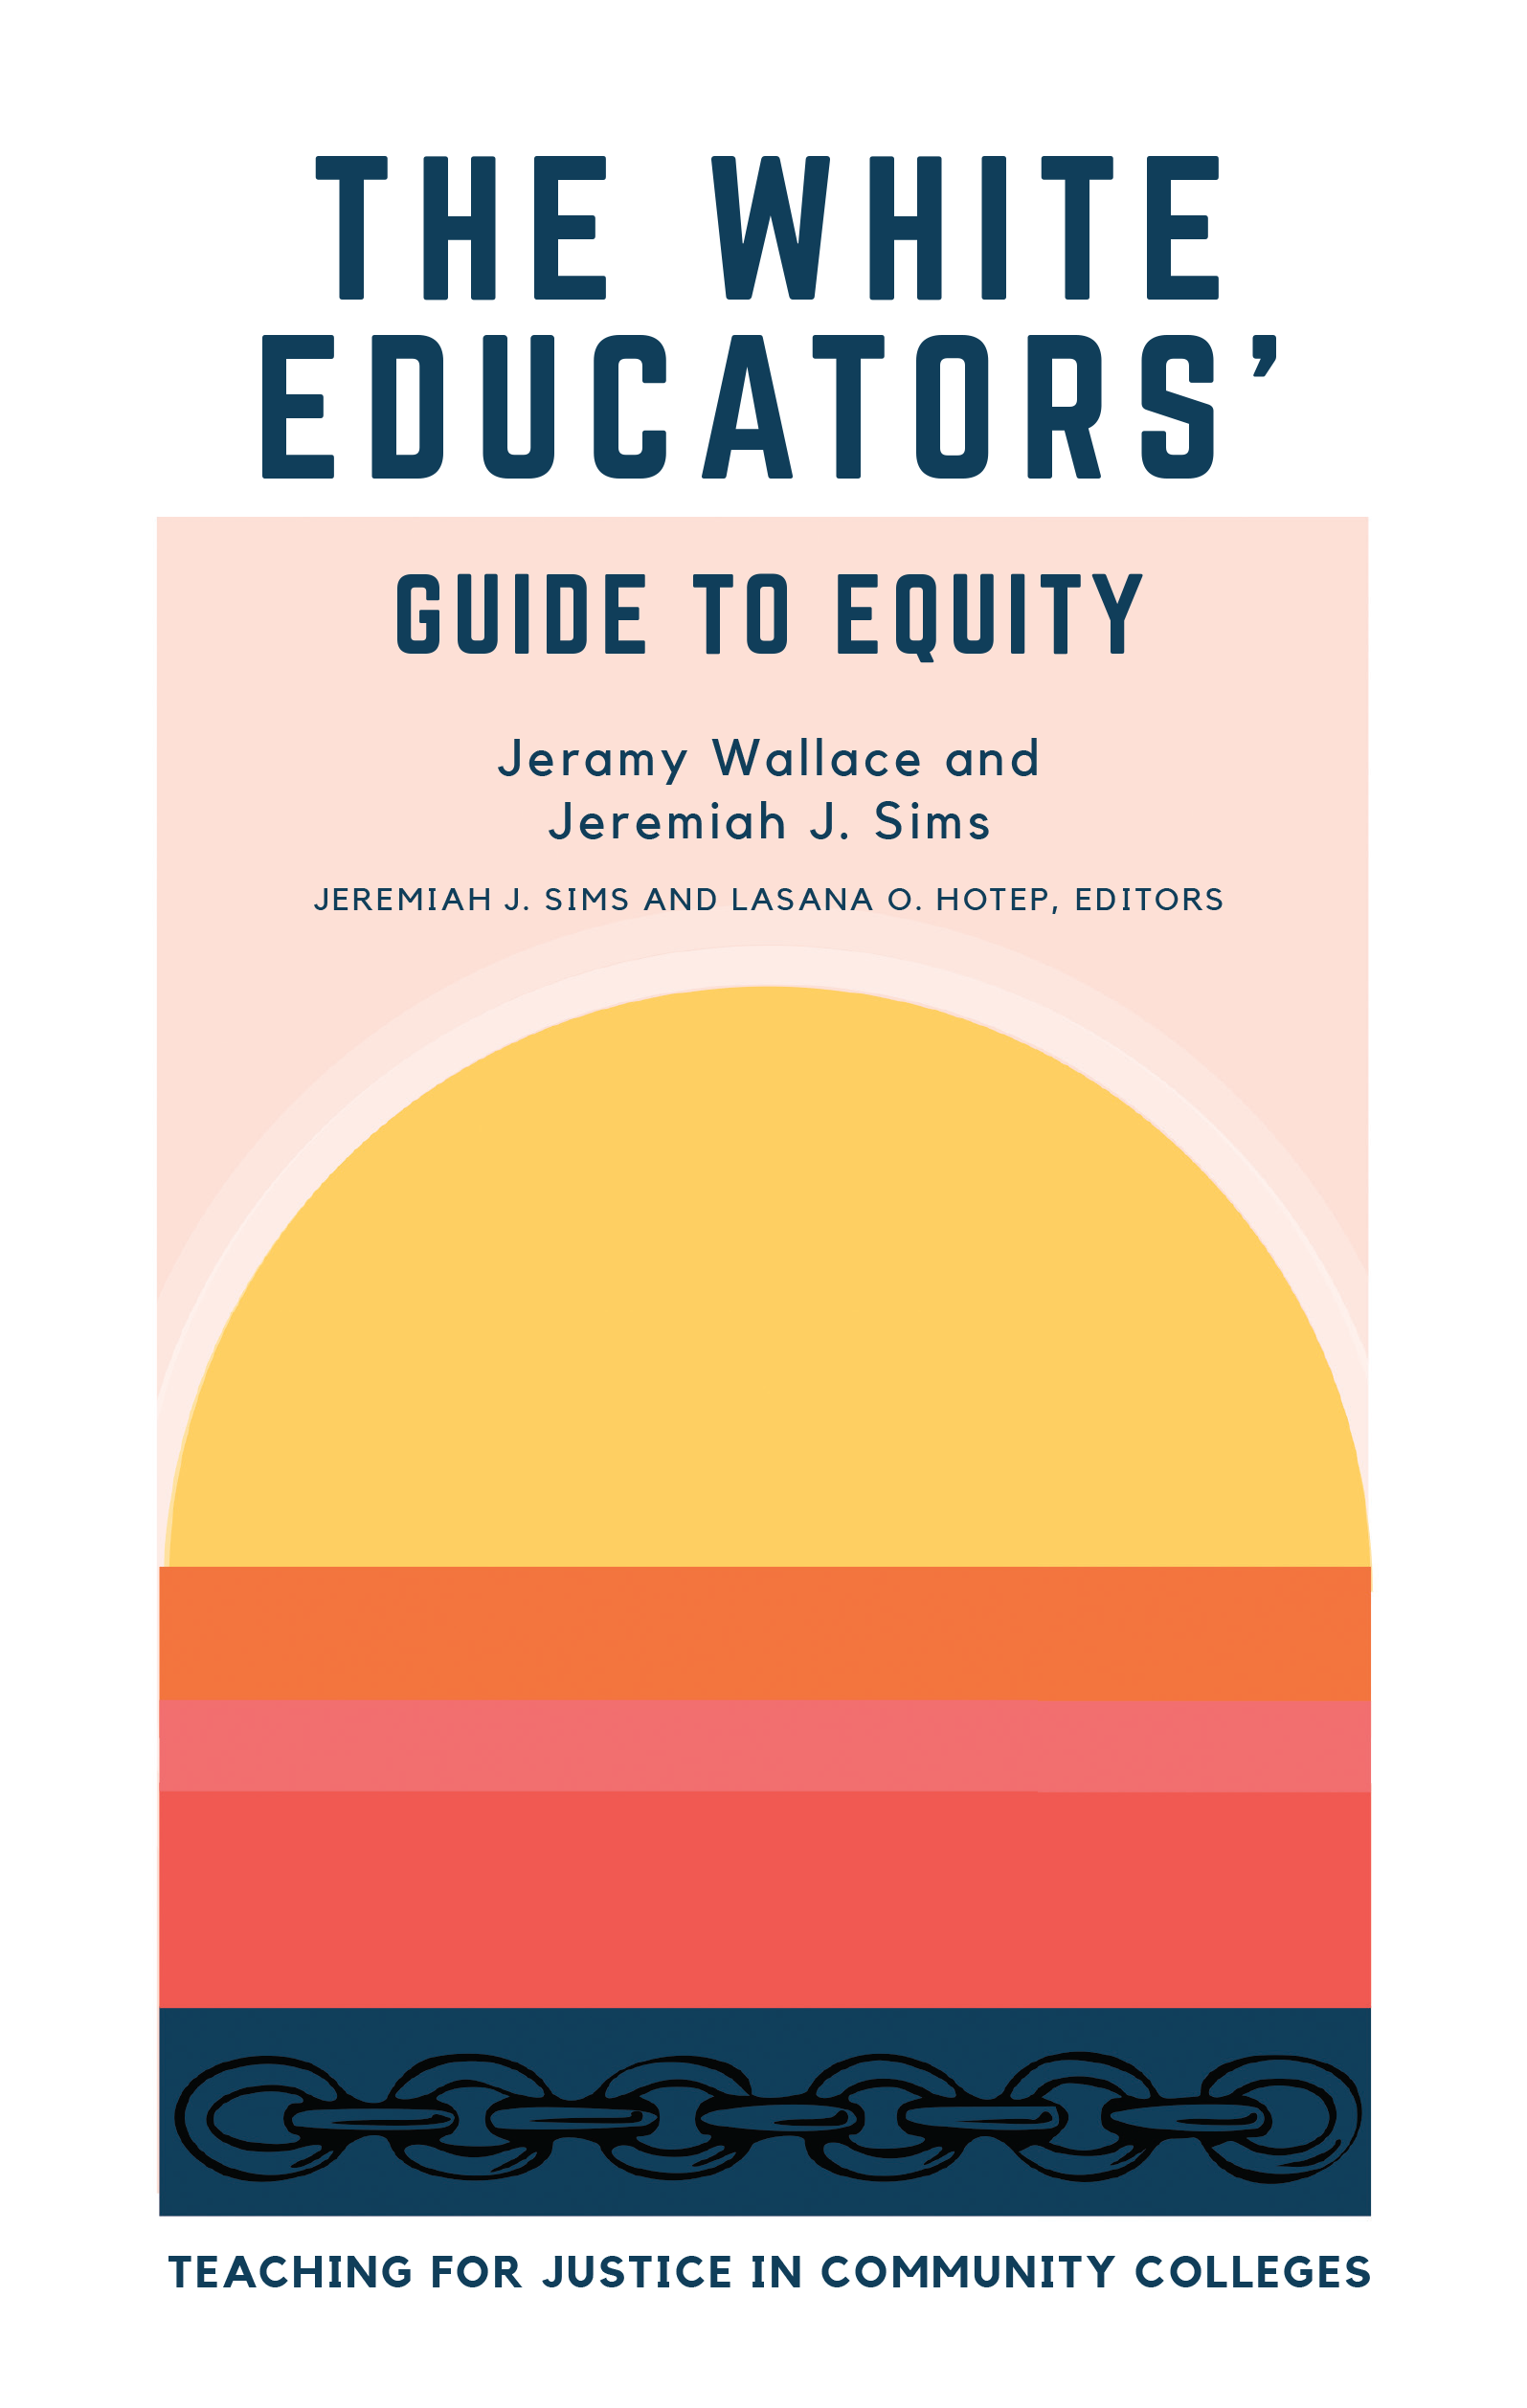 Book cover for "The White Educator’s Guide to Equity: Teaching for Social Justice in Community Colleges"